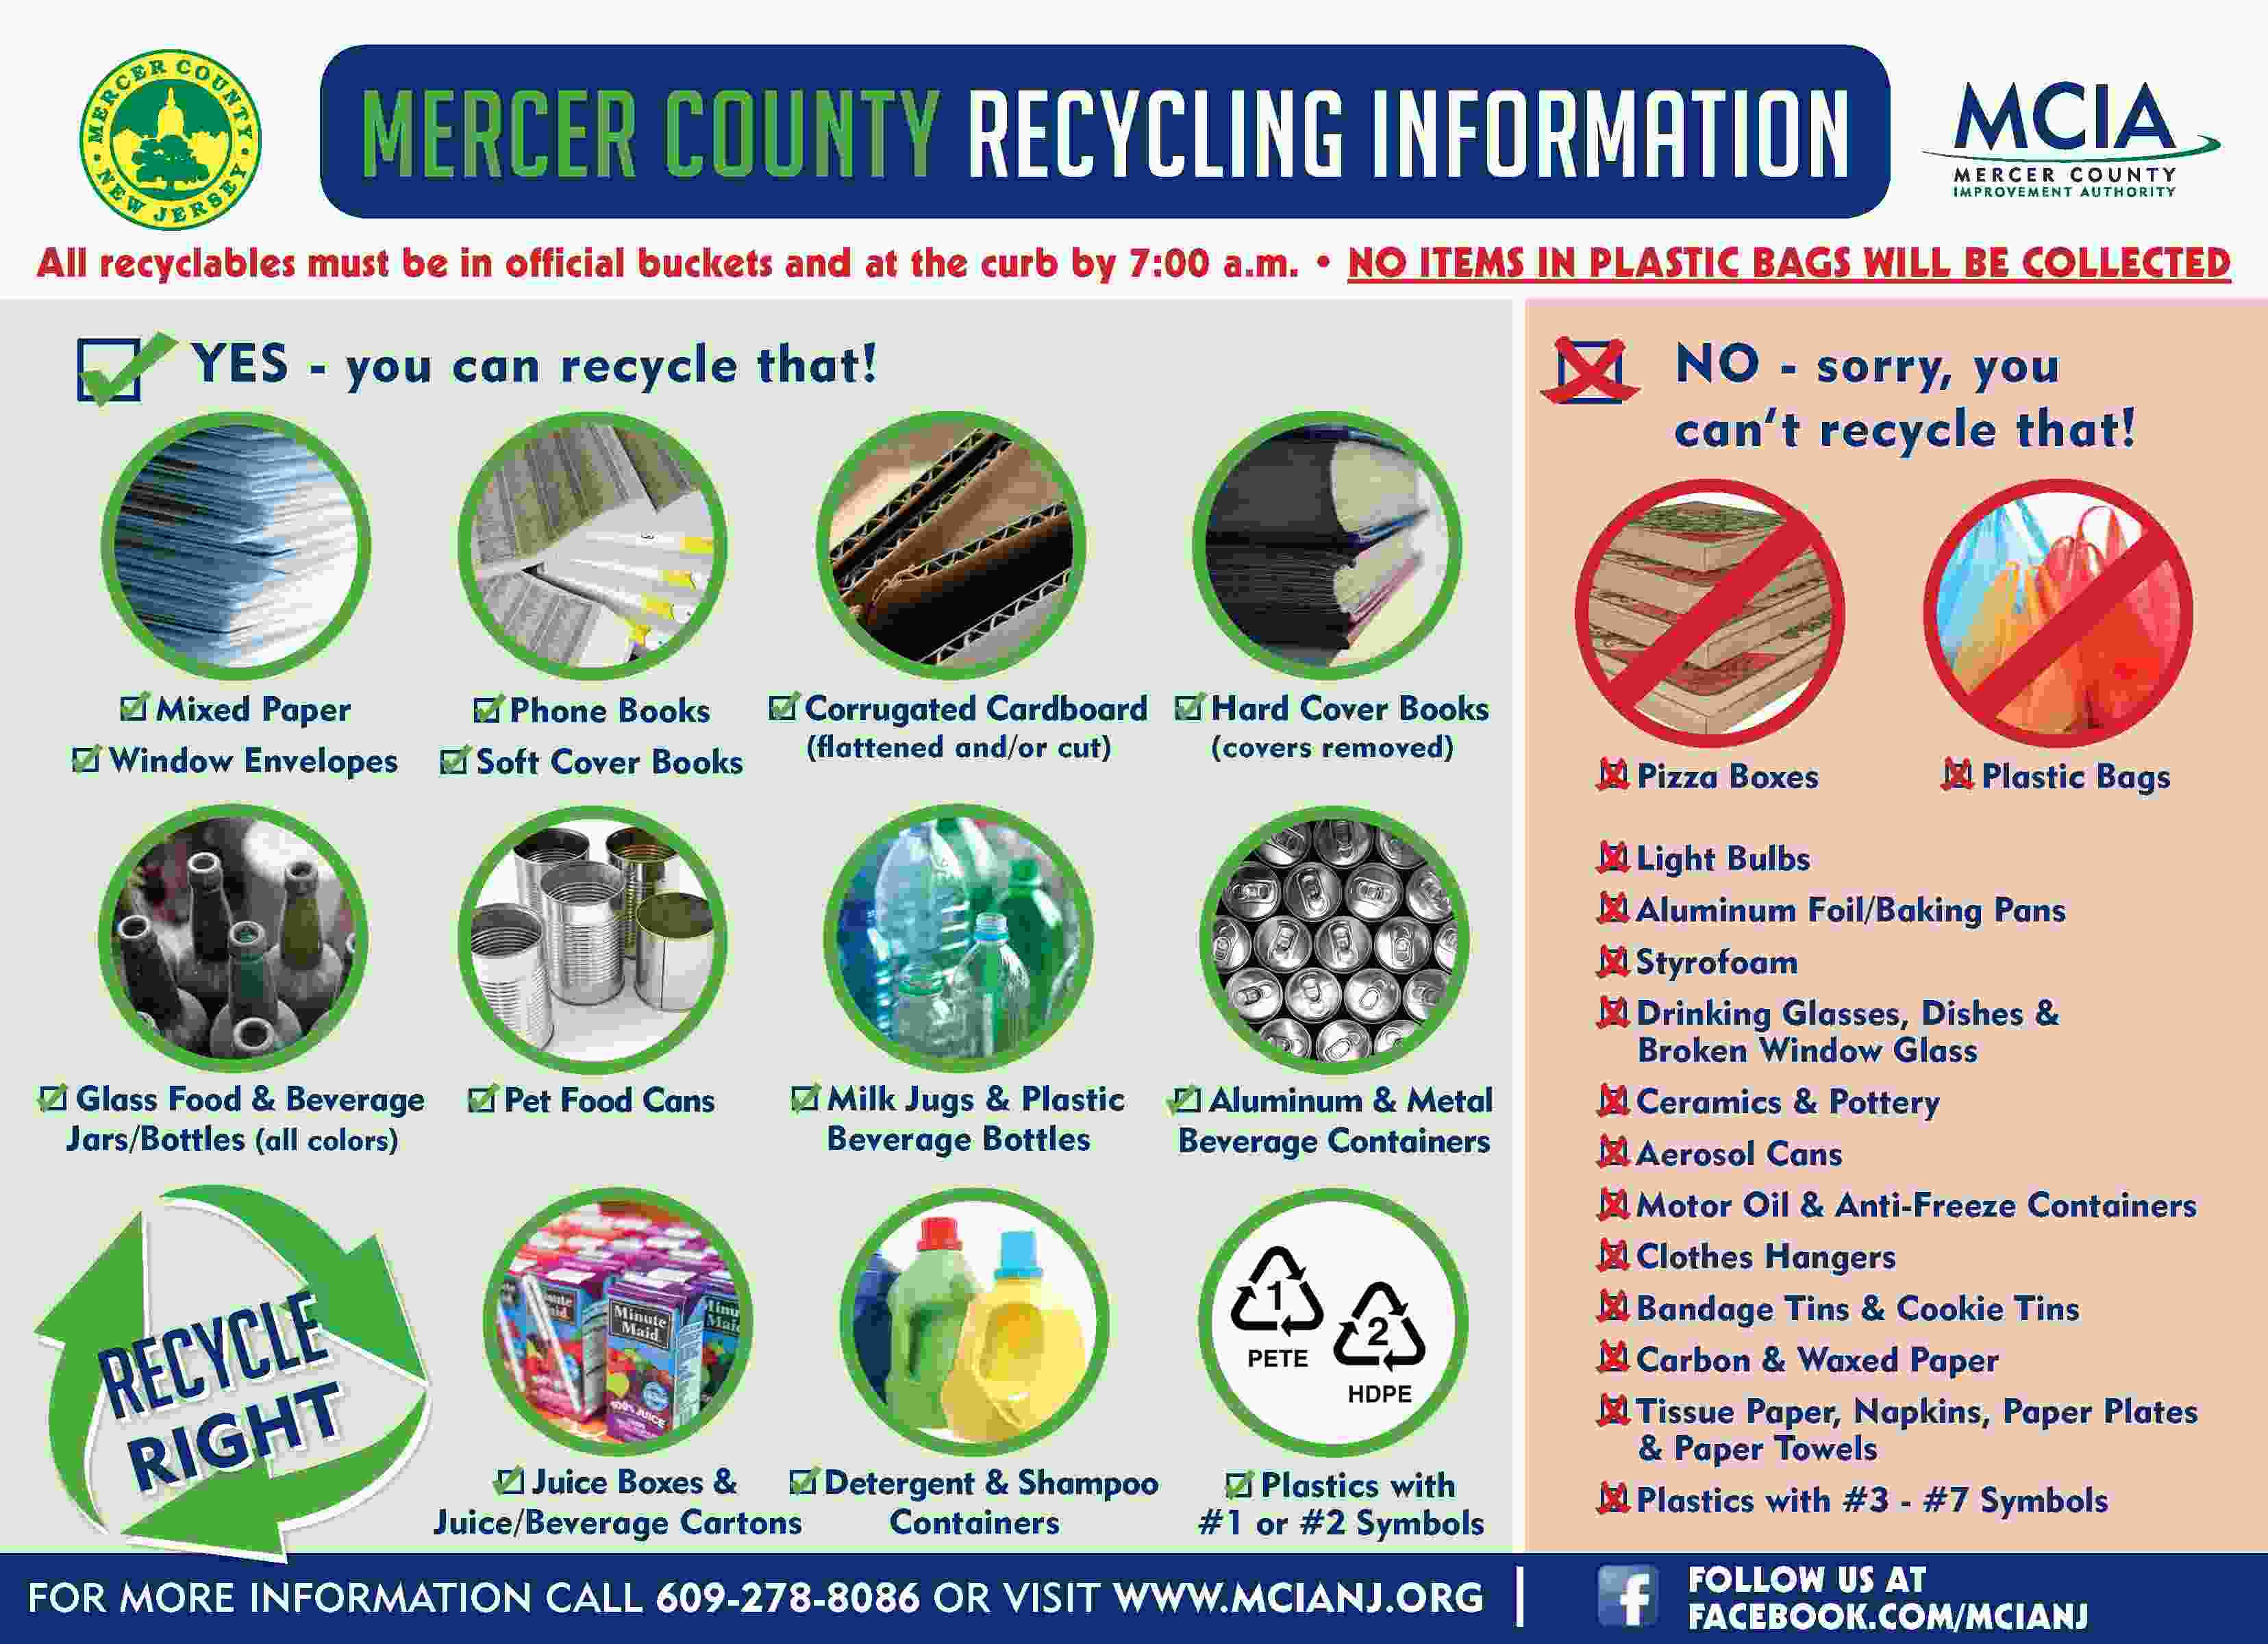 Jackson Nj Recycling Schedule 2022 Recycling Schedule - Mercer County Nj Improvement Authority